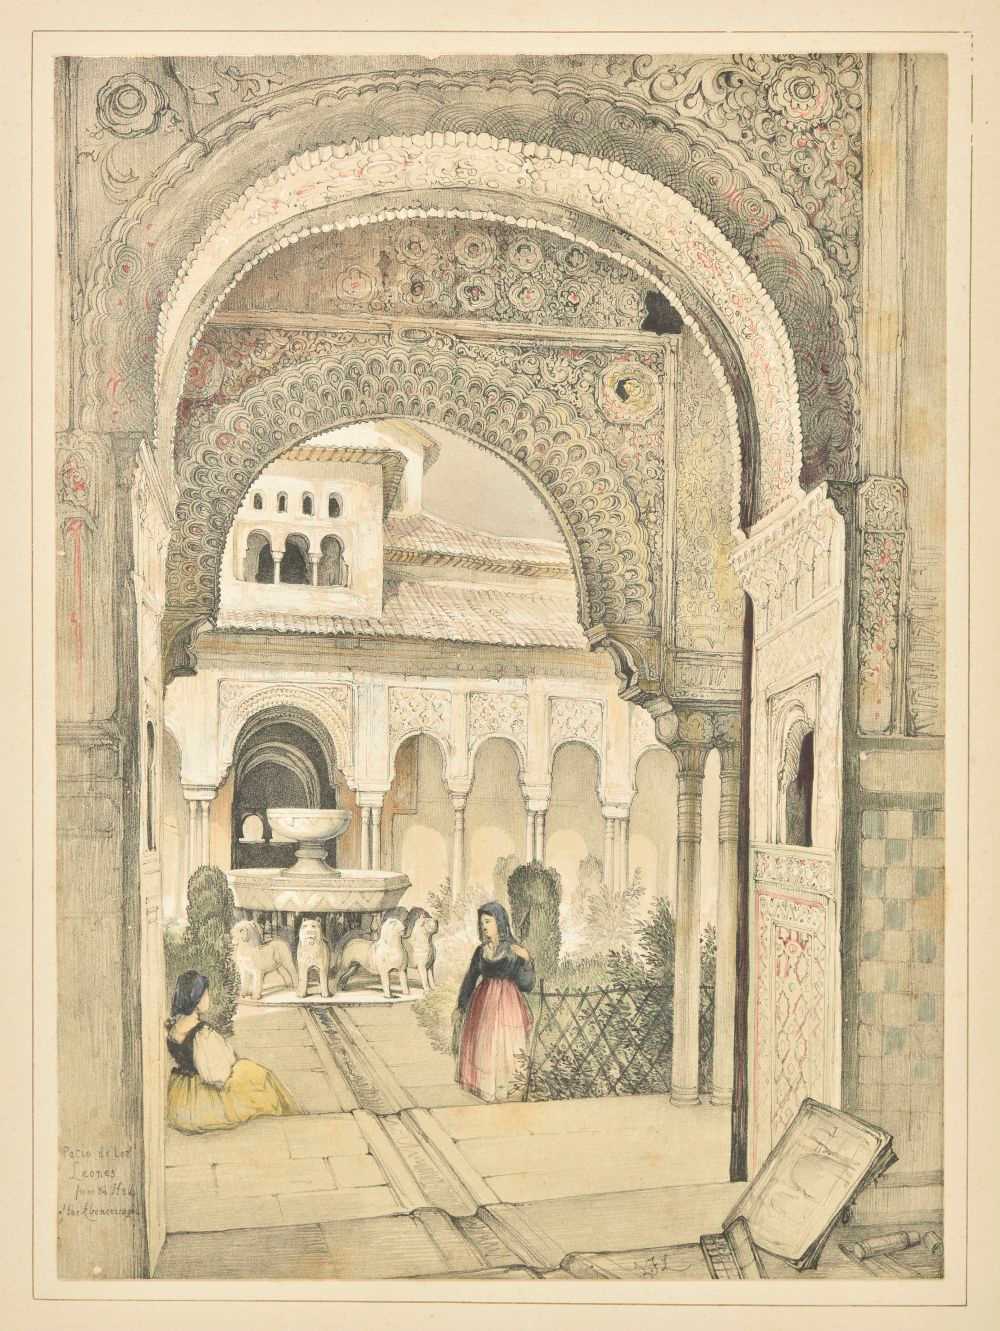 Lot 110 - Lewis (John Frederick). 11 views from Lewis's Sketches and Drawings of the Alhambra, [1835]